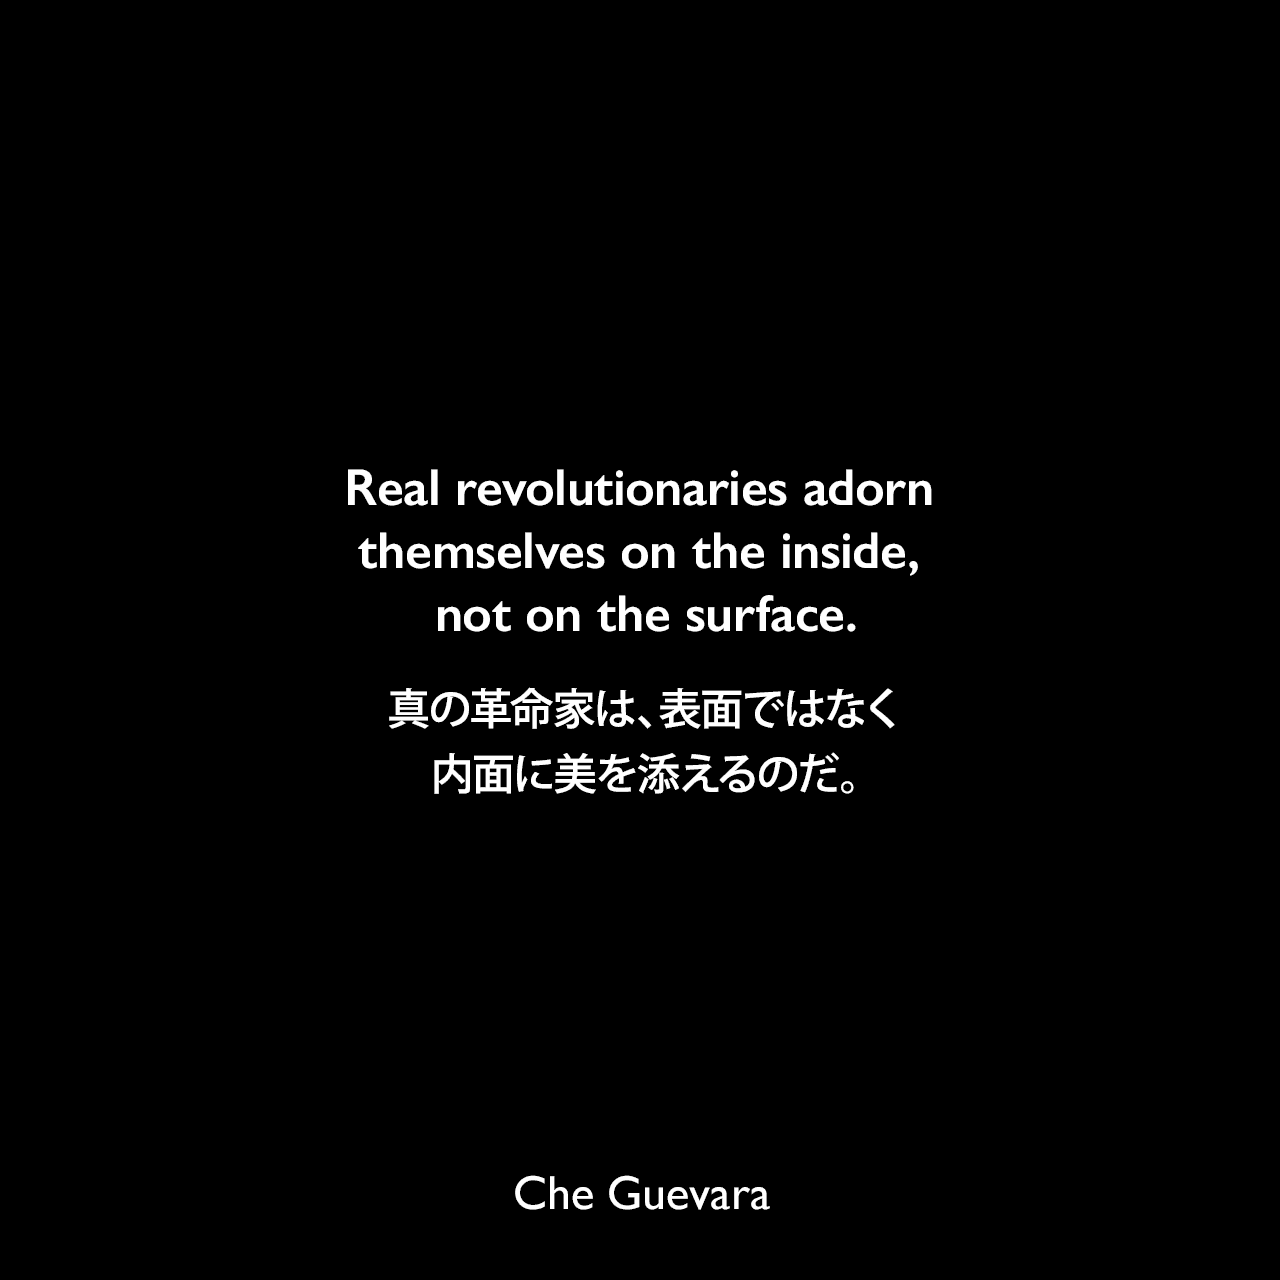 Real revolutionaries adorn themselves on the inside, not on the surface.真の革命家は、表面ではなく内面に美を添えるのだ。- ジョン・リー・アンダーソンによる本「Che Guevara: A Revolutionary Life」よりChe Guevara